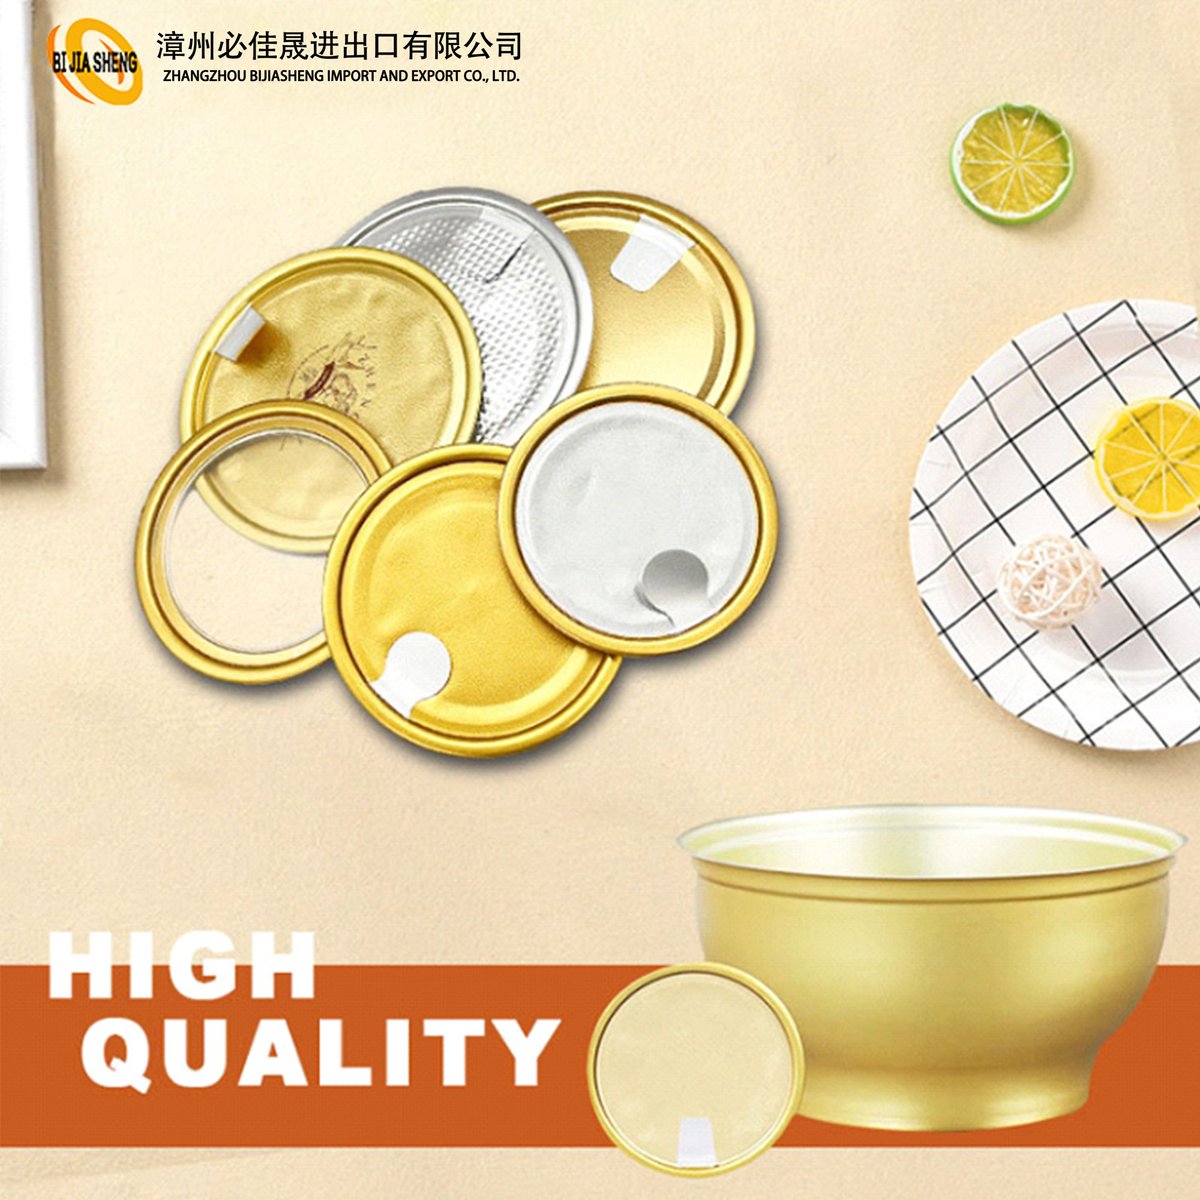 Metal Bowl: Make your bird's nest packaging stand out!Contact us today!

#FoodPackaging #BirdsNest #BirdsNestDrink #MetalContainer #Aluminum #PackagingDesign #CustomizeYourBrand #TinCan #manufacturer #OneStopService #manufacturer #tổyến #yếnsào #Customizable